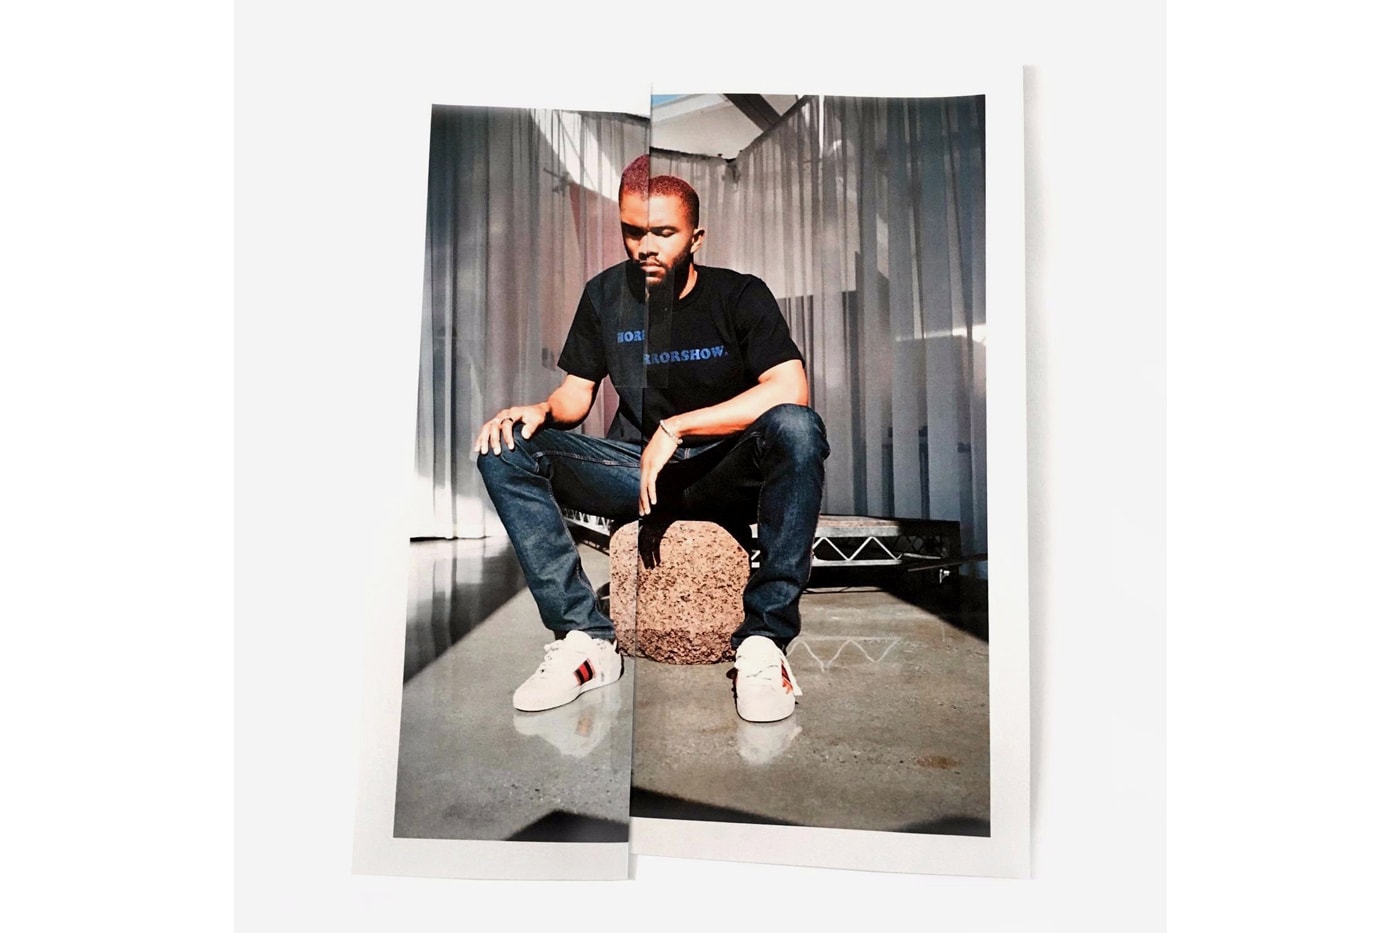 Frank Ocean "Chanel" Remix With A$AP Rocky